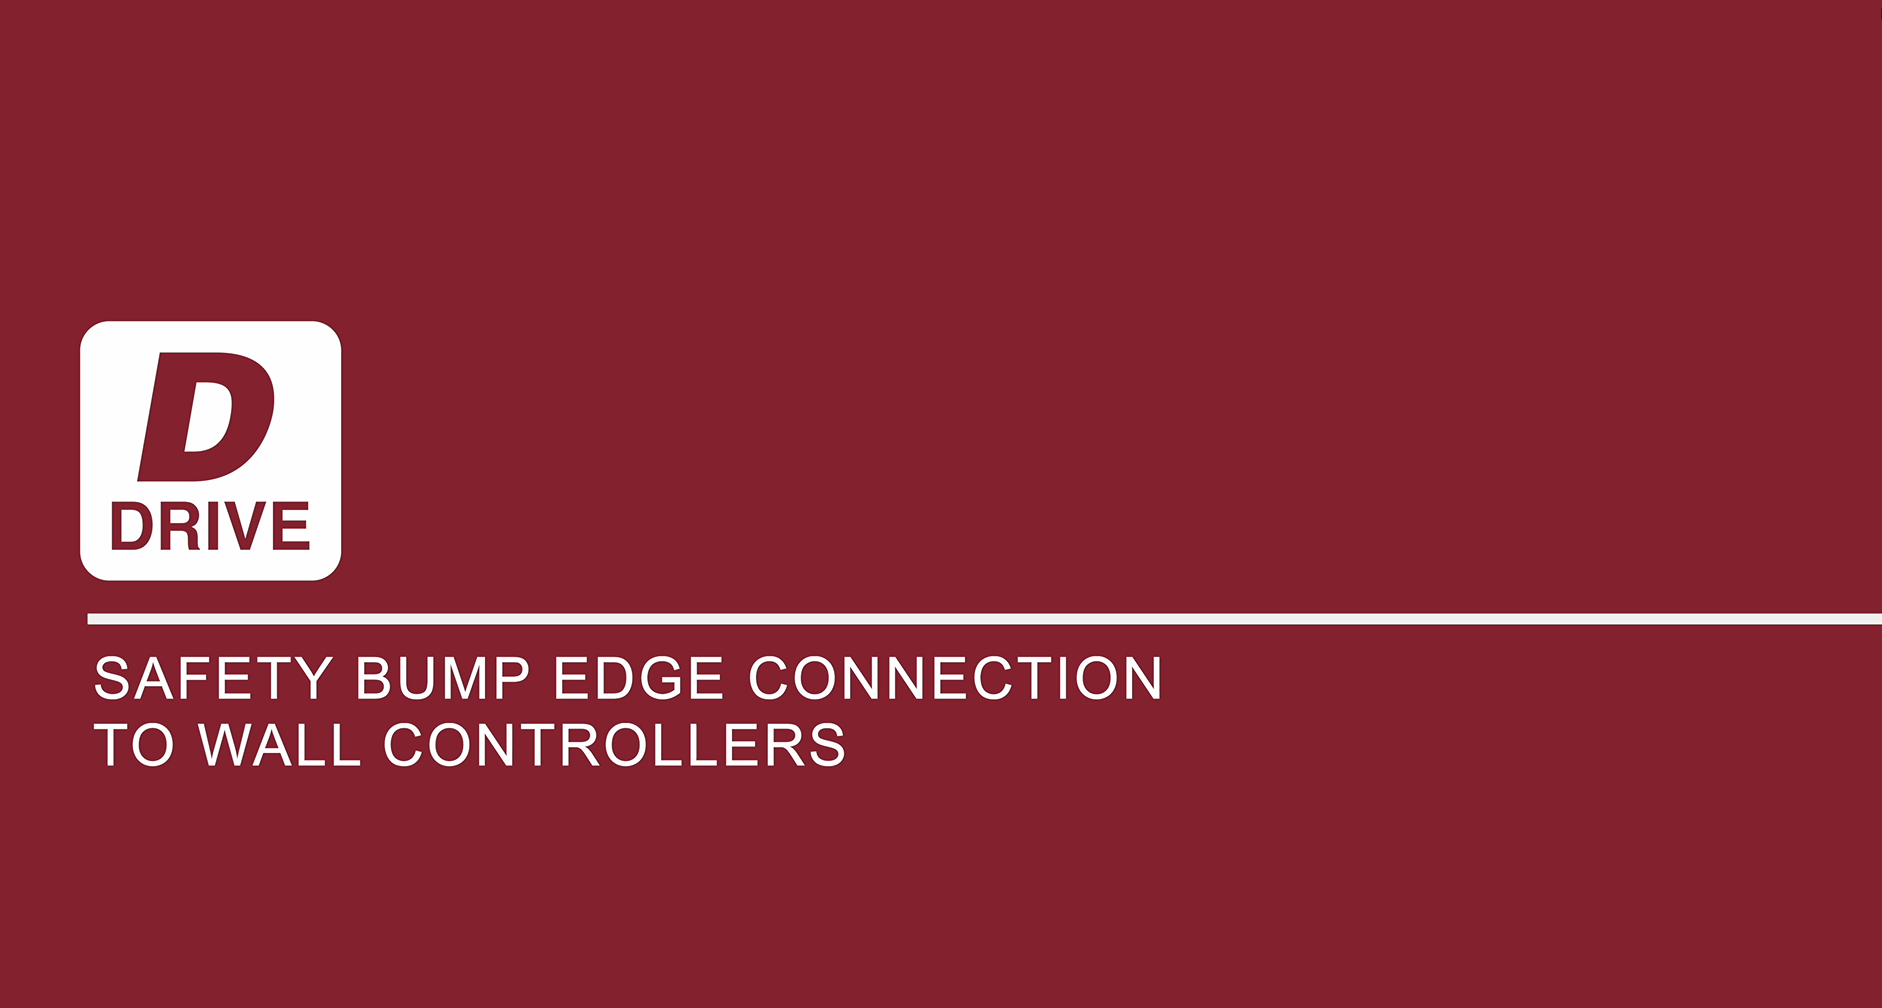 Safety bump edge connection to wall controllers